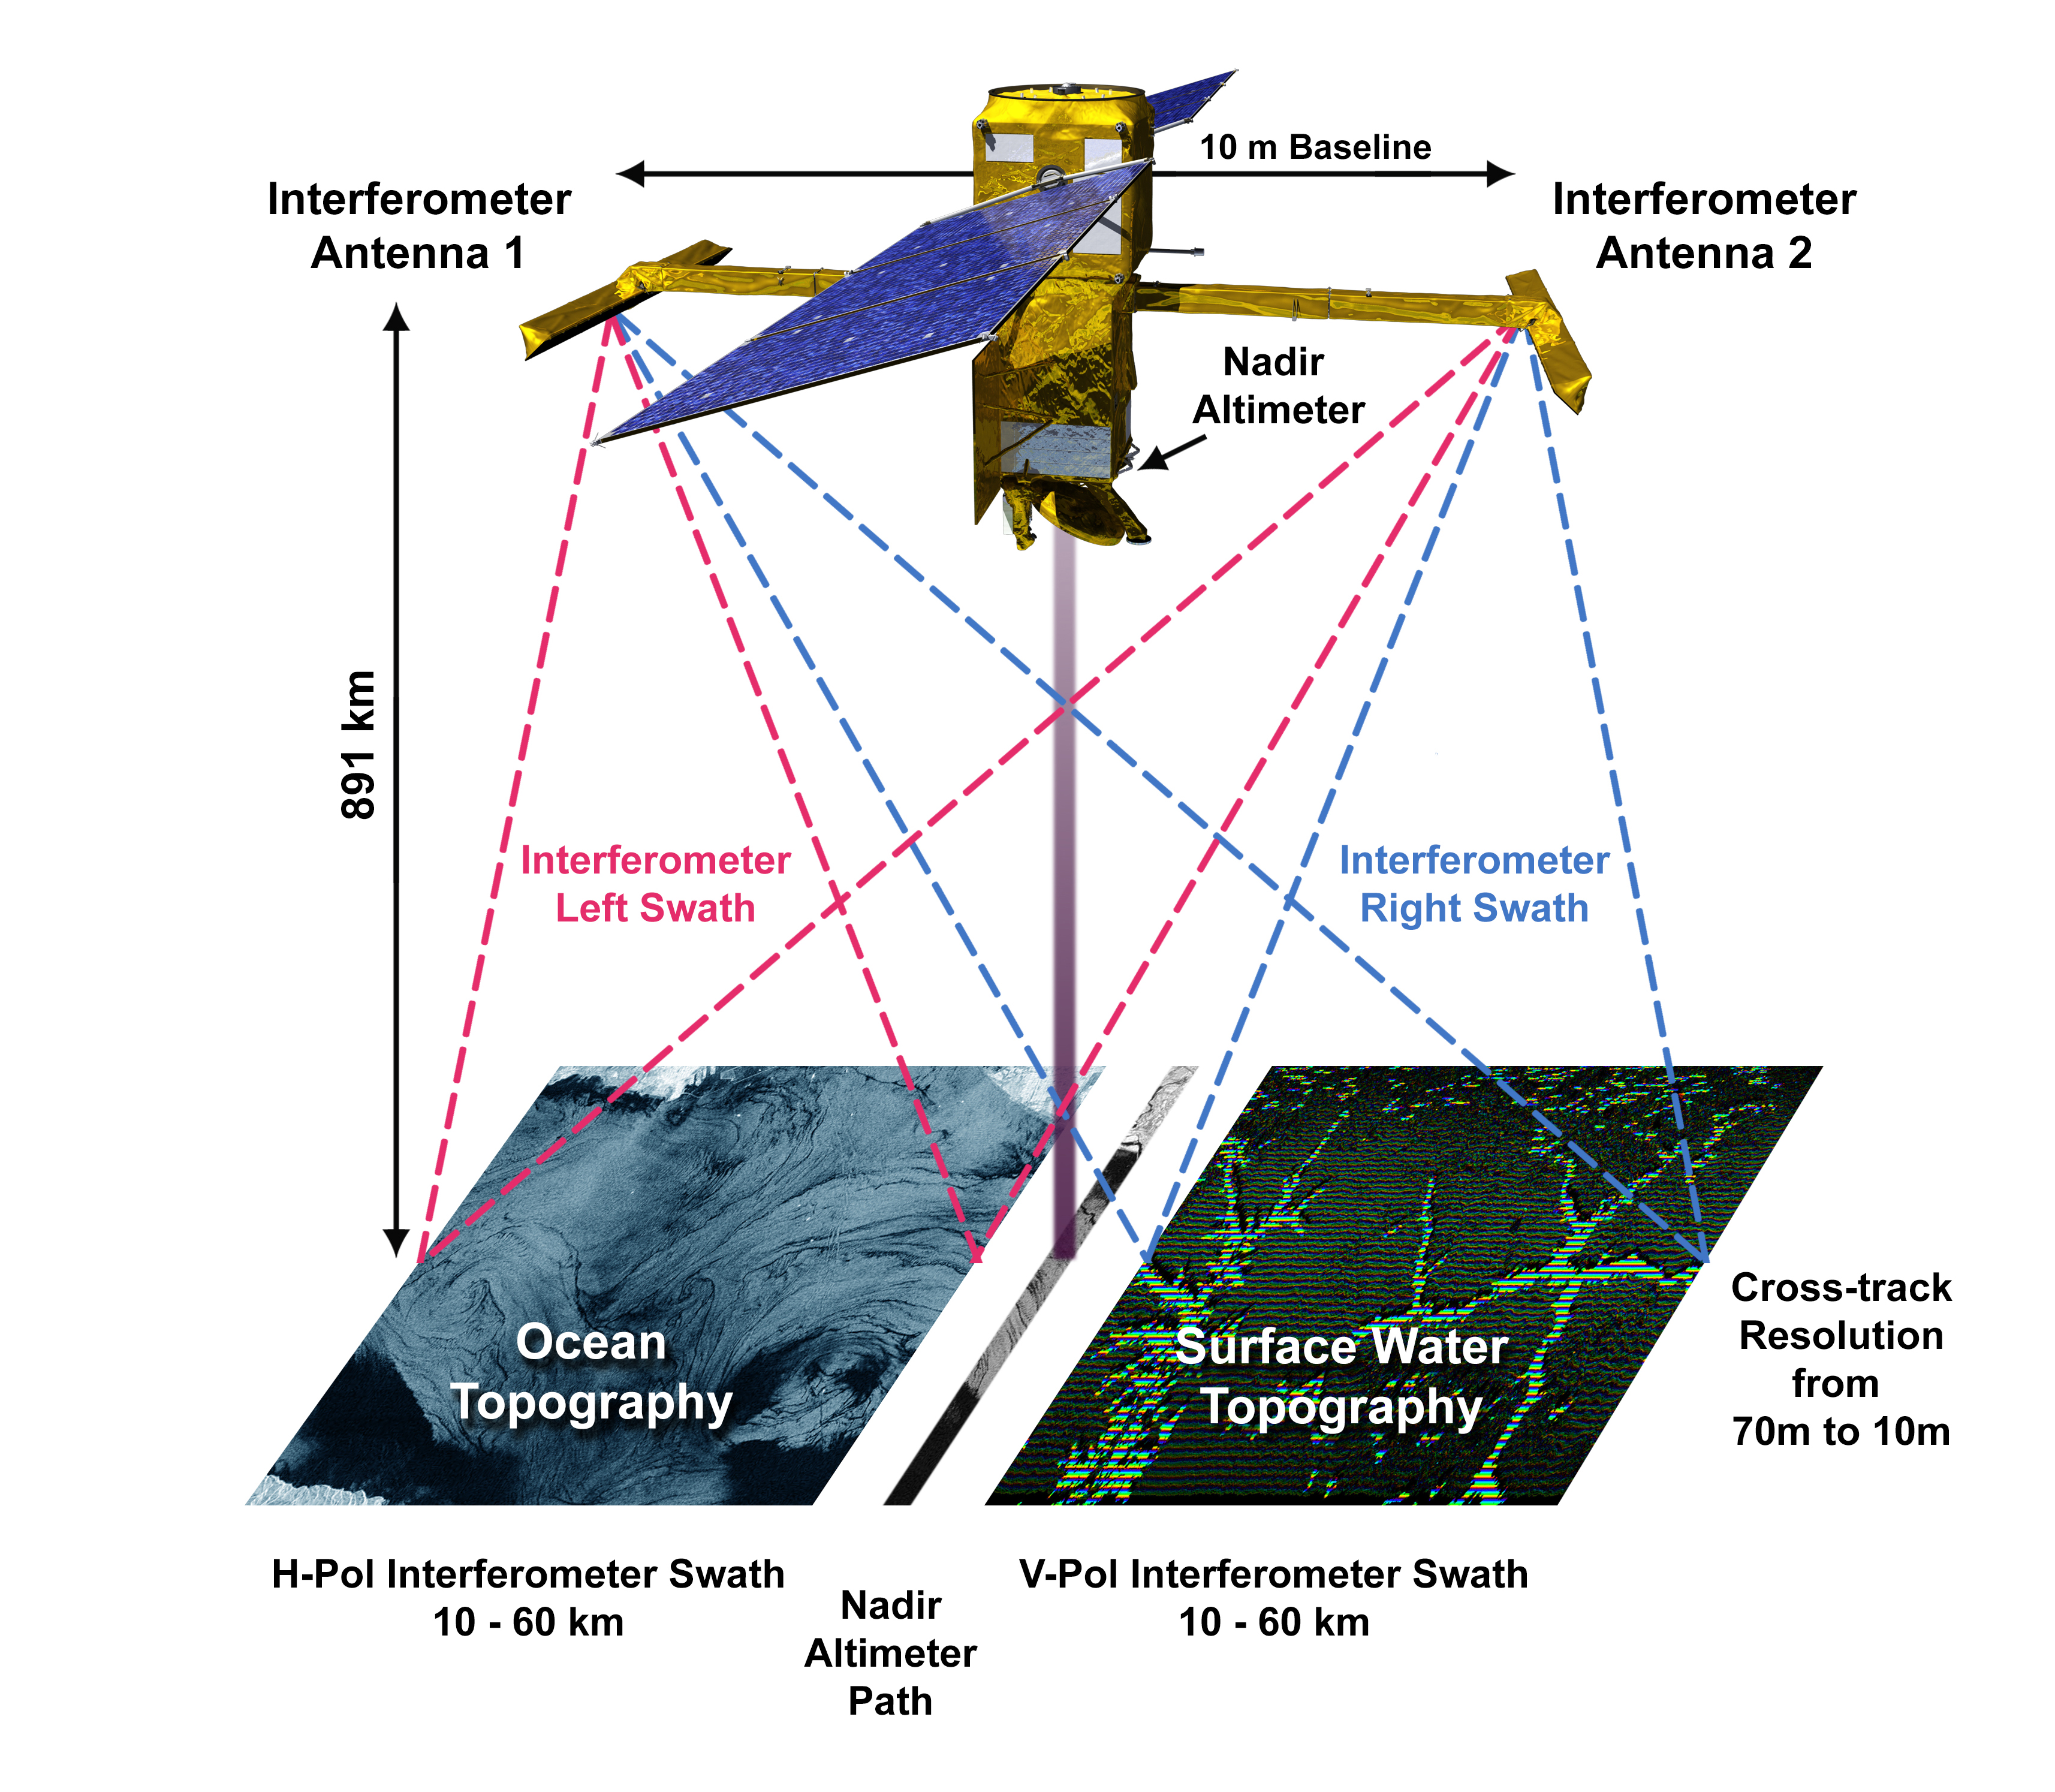 A diagram illustrating the swaths of data that SWOT will collect, including labels for the following: 10 m baseline between SWOT's receivers; a distance of 891 km between the surface and Interferometer Antenna 1; Interferometer Left Swath resulting in ocean topography with an H-Pol swath of 10-60 km; Interferometer Right Swath resulting in surface water topography with a V-Pol of 10-60 km; a straight-down Nadir Altimeter path directly below the spacecraft in the gap between the swaths; a cross-track resolution from 70m to 10m.